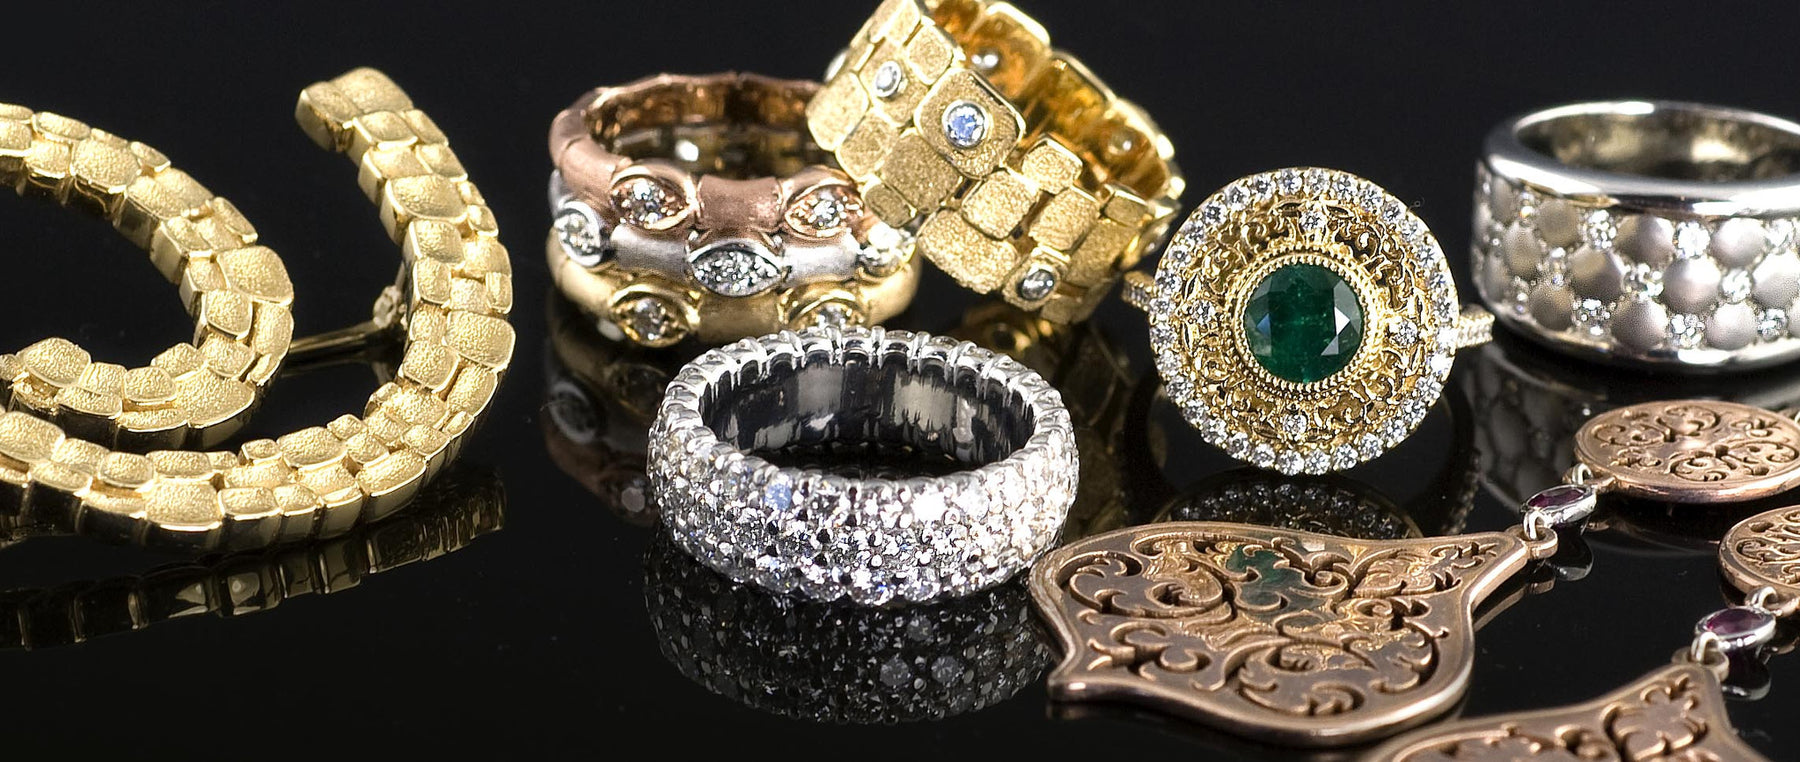 How to Buy Jewelry When You Have a Metal Allergy